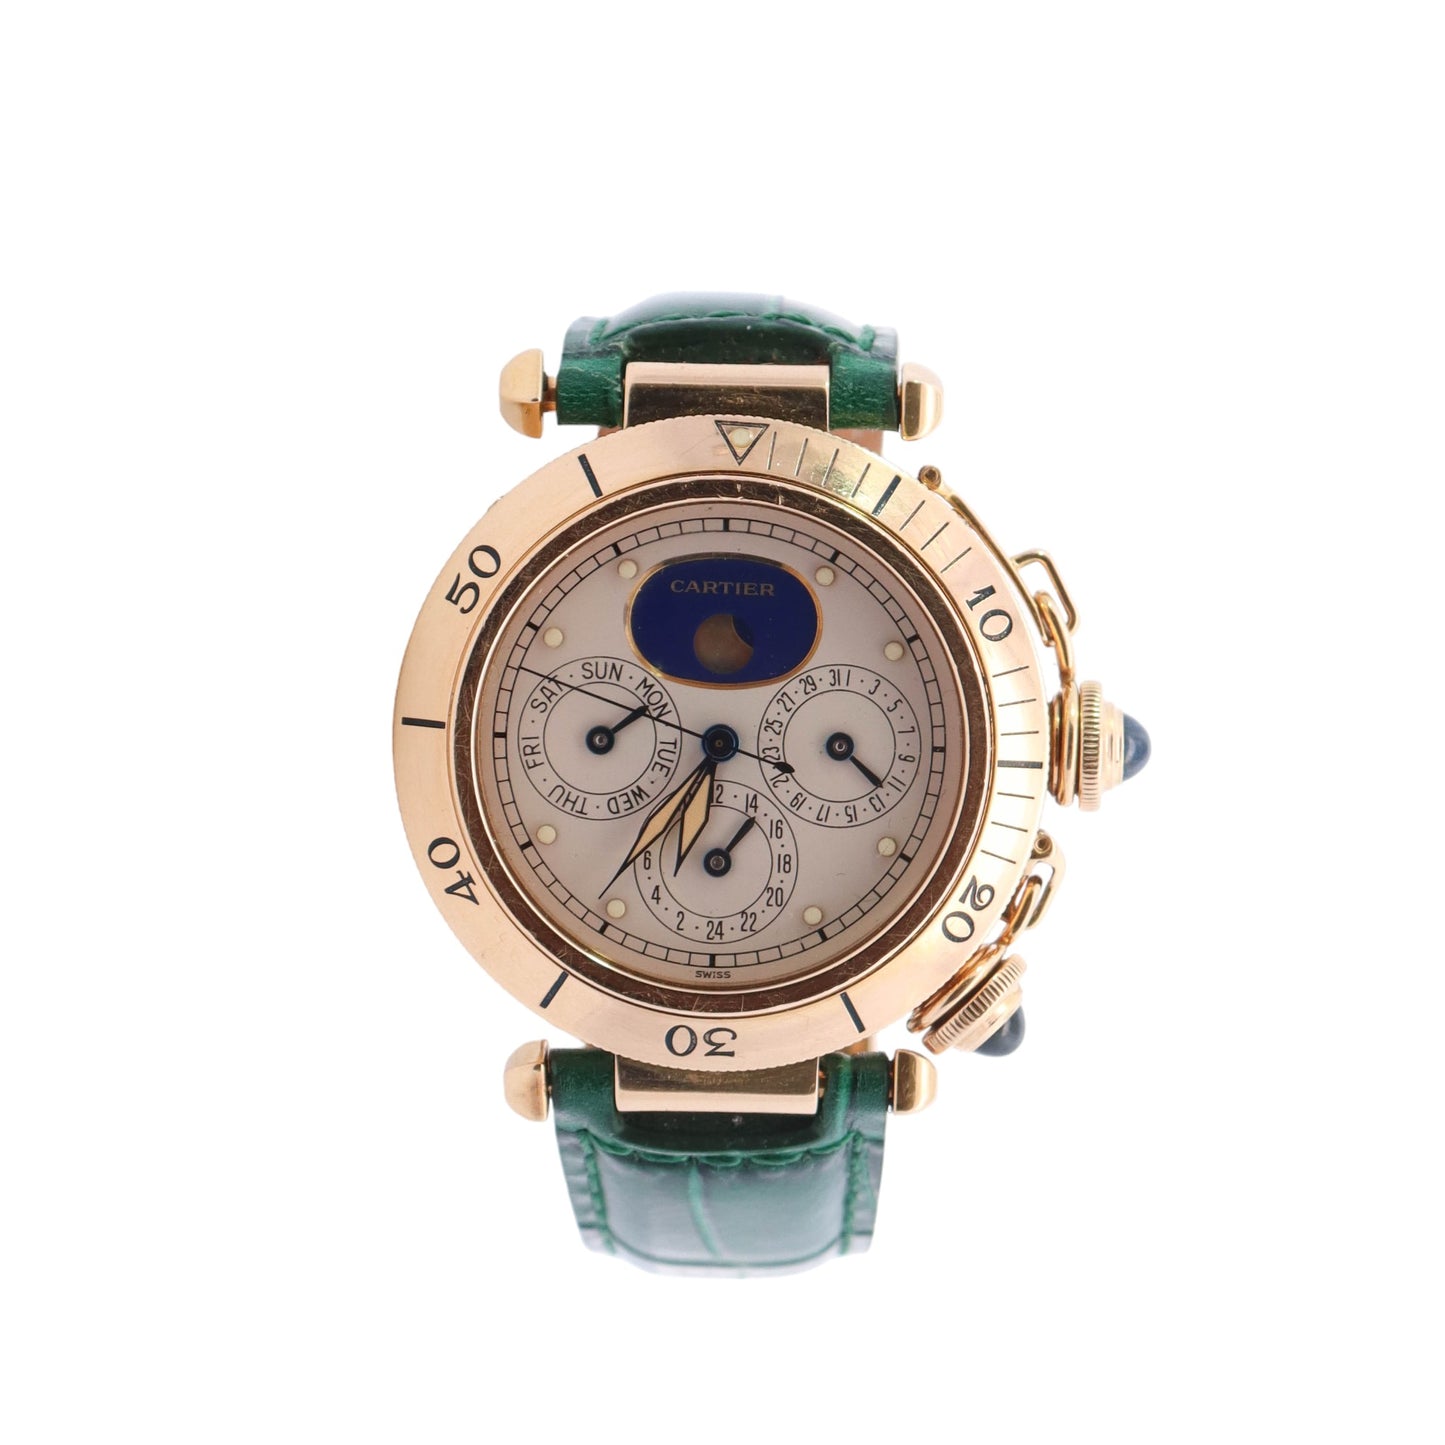 Cartier Pasha De Cartier Moonphase Dual Time Zone 18k Yellow Gold 38mm Ivory Moonphase Dot Dial Watch Reference #: 30002 - Happy Jewelers Fine Jewelry Lifetime Warranty